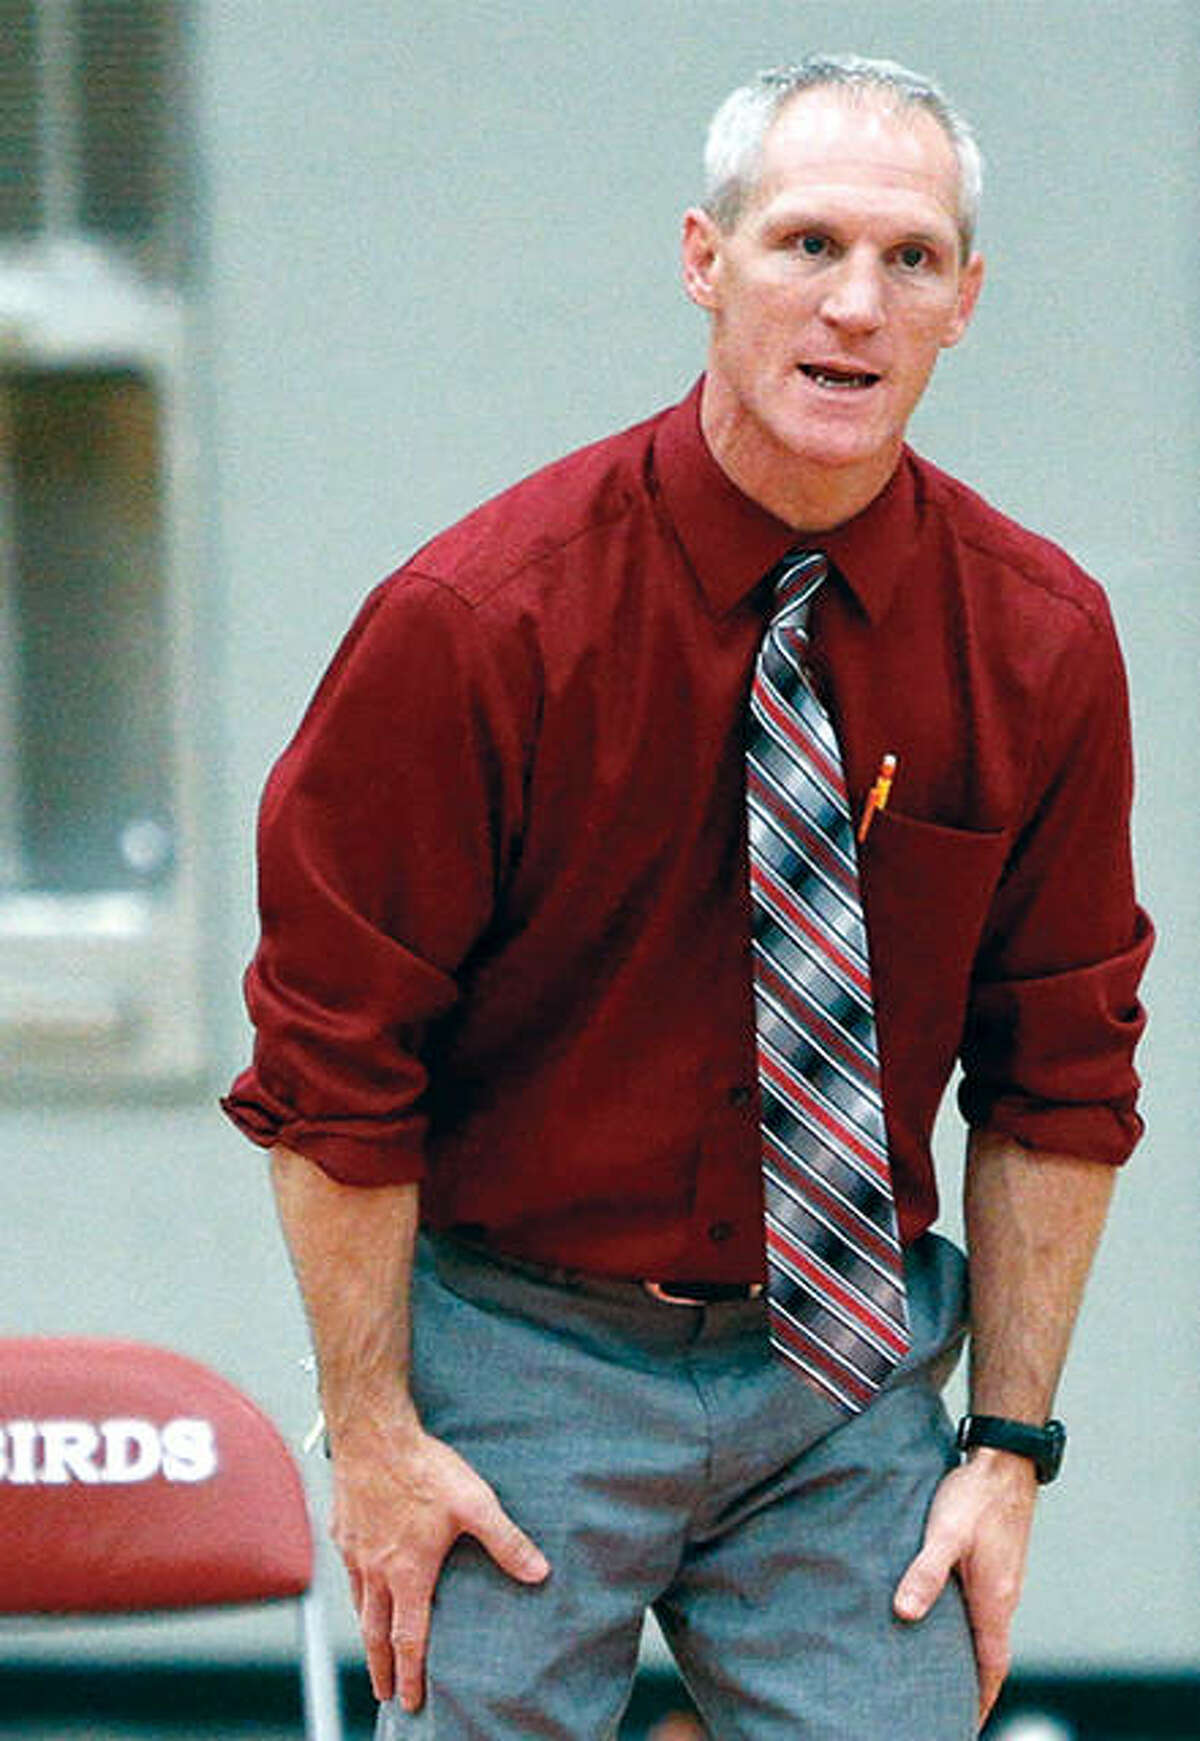 Alton wrestling coach Eric Roberson’s team will compete in the newly created summer season instead of its usual winter season. The decision was announced Wednesday afternoon by the IHSA.